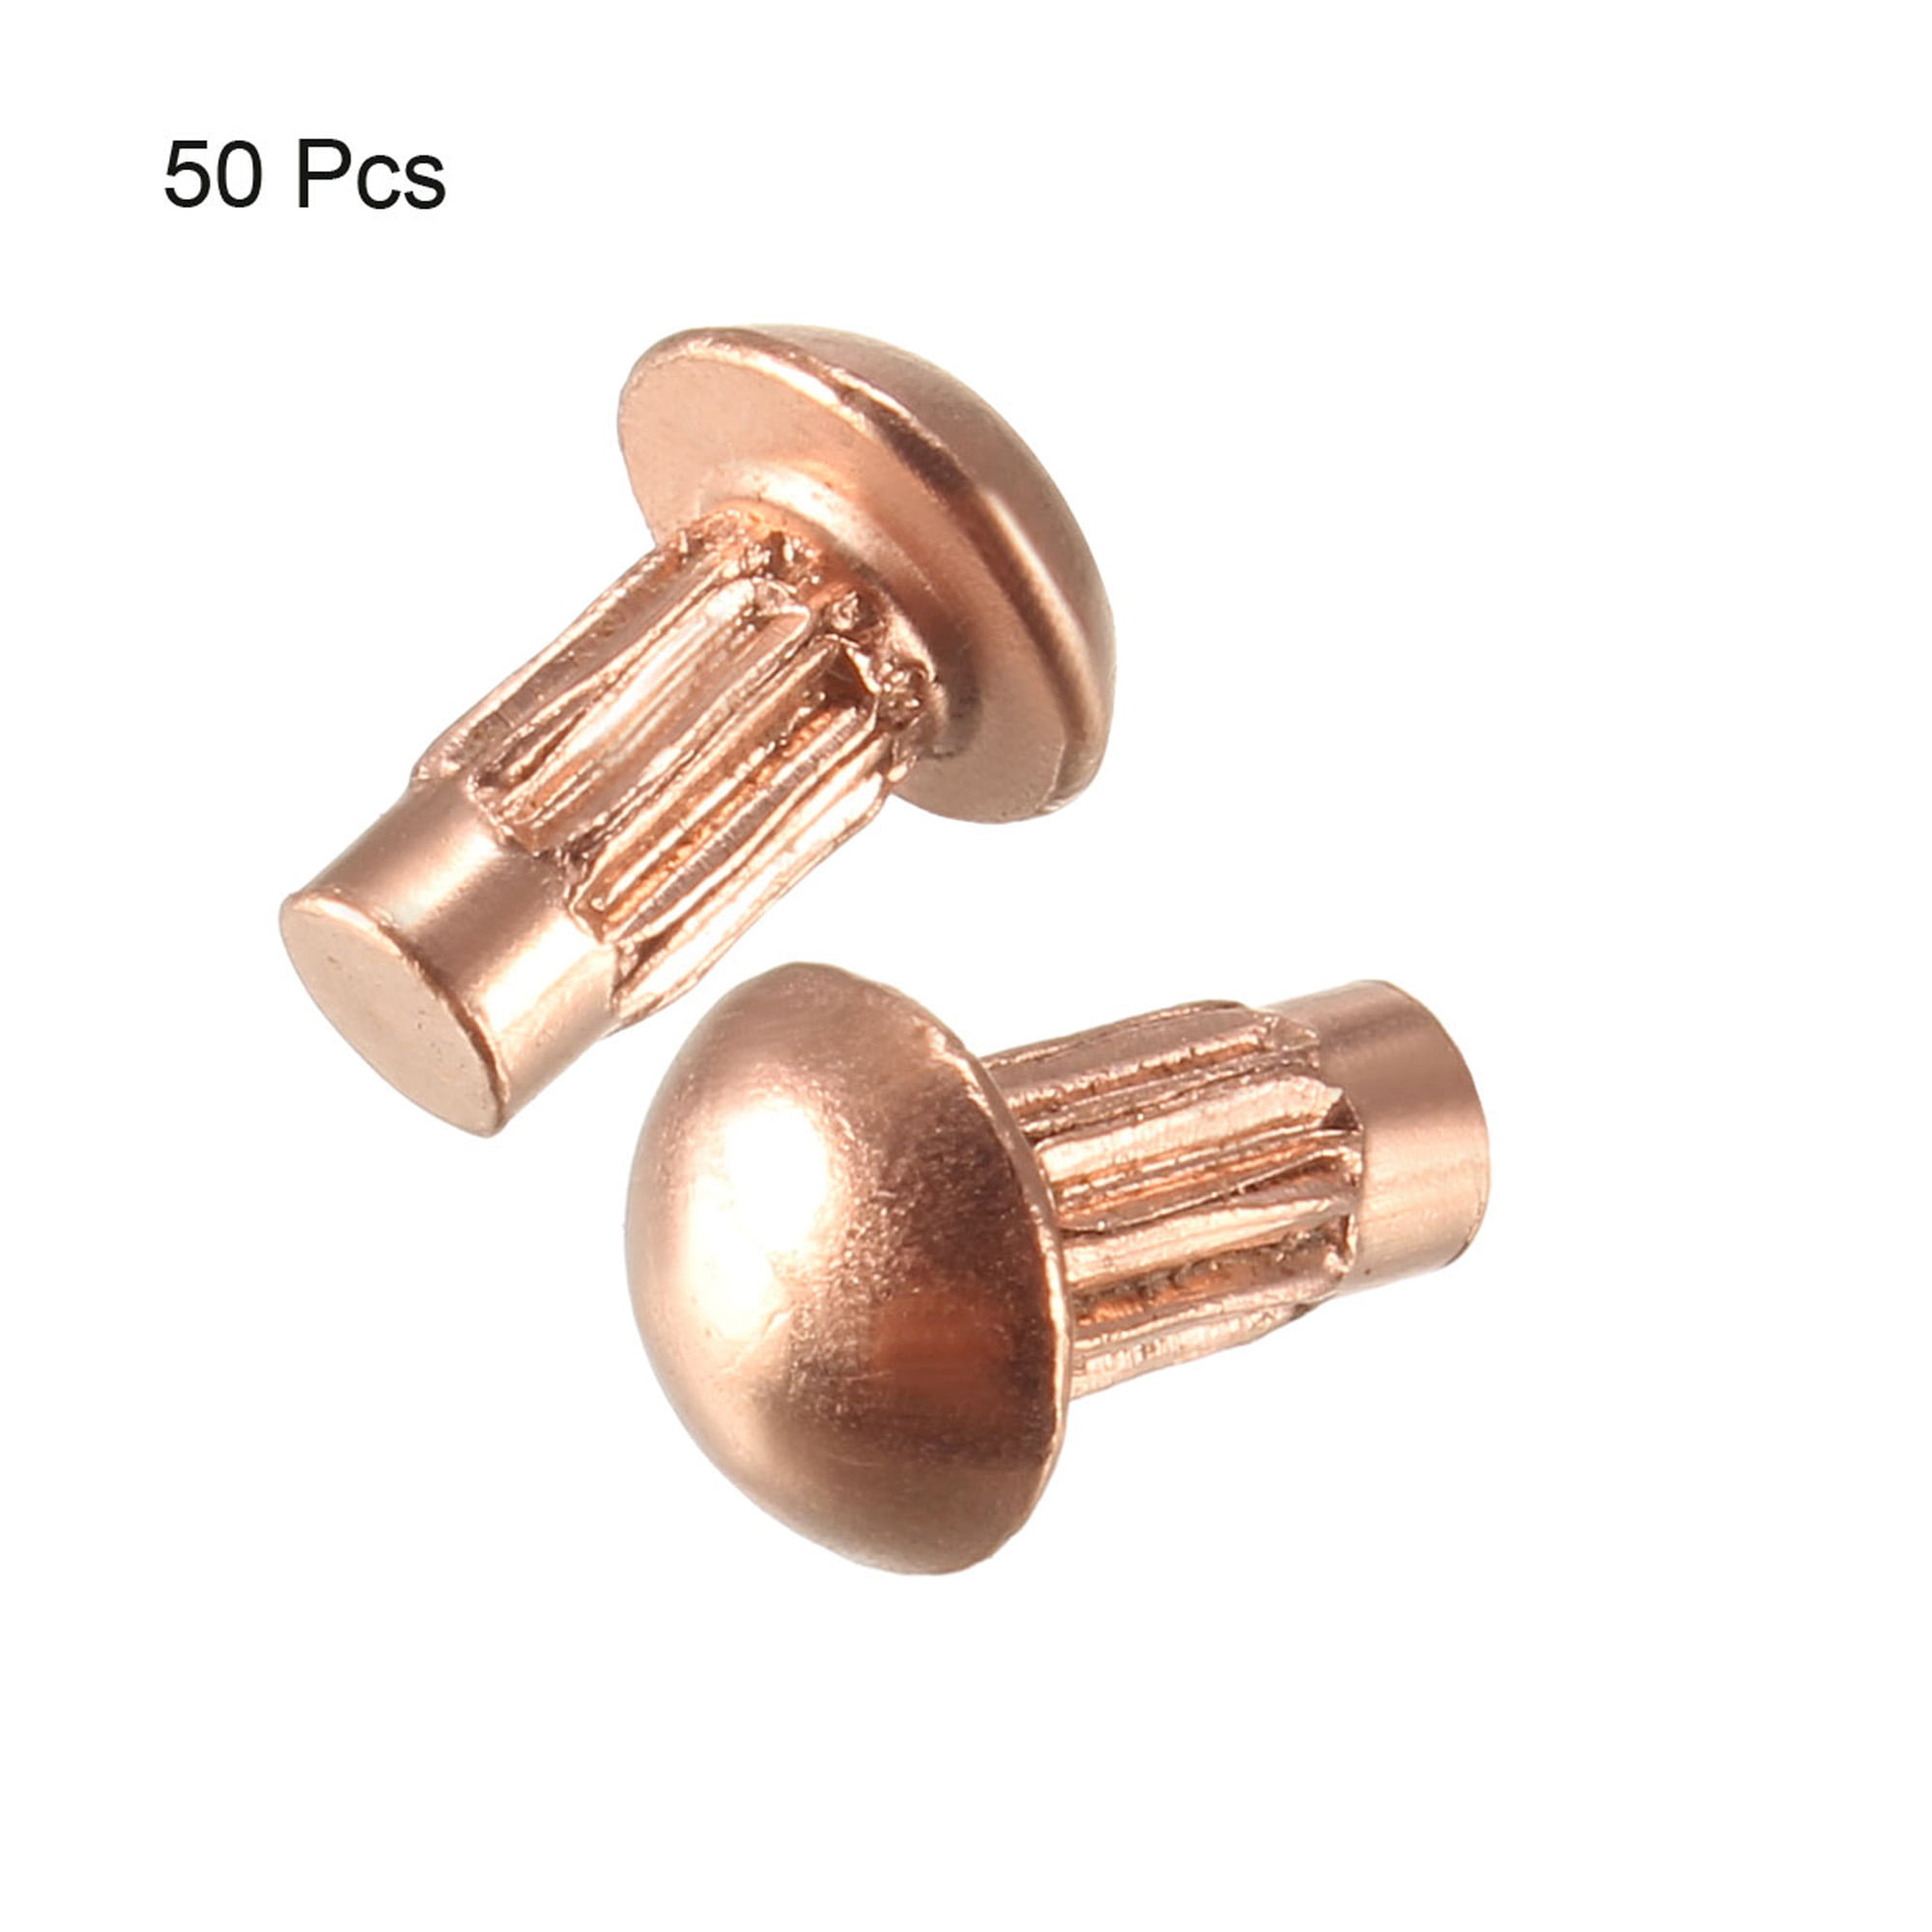 M6 M8 Copper Round Button Pan Head Solid Rivets Insert Fasteners 